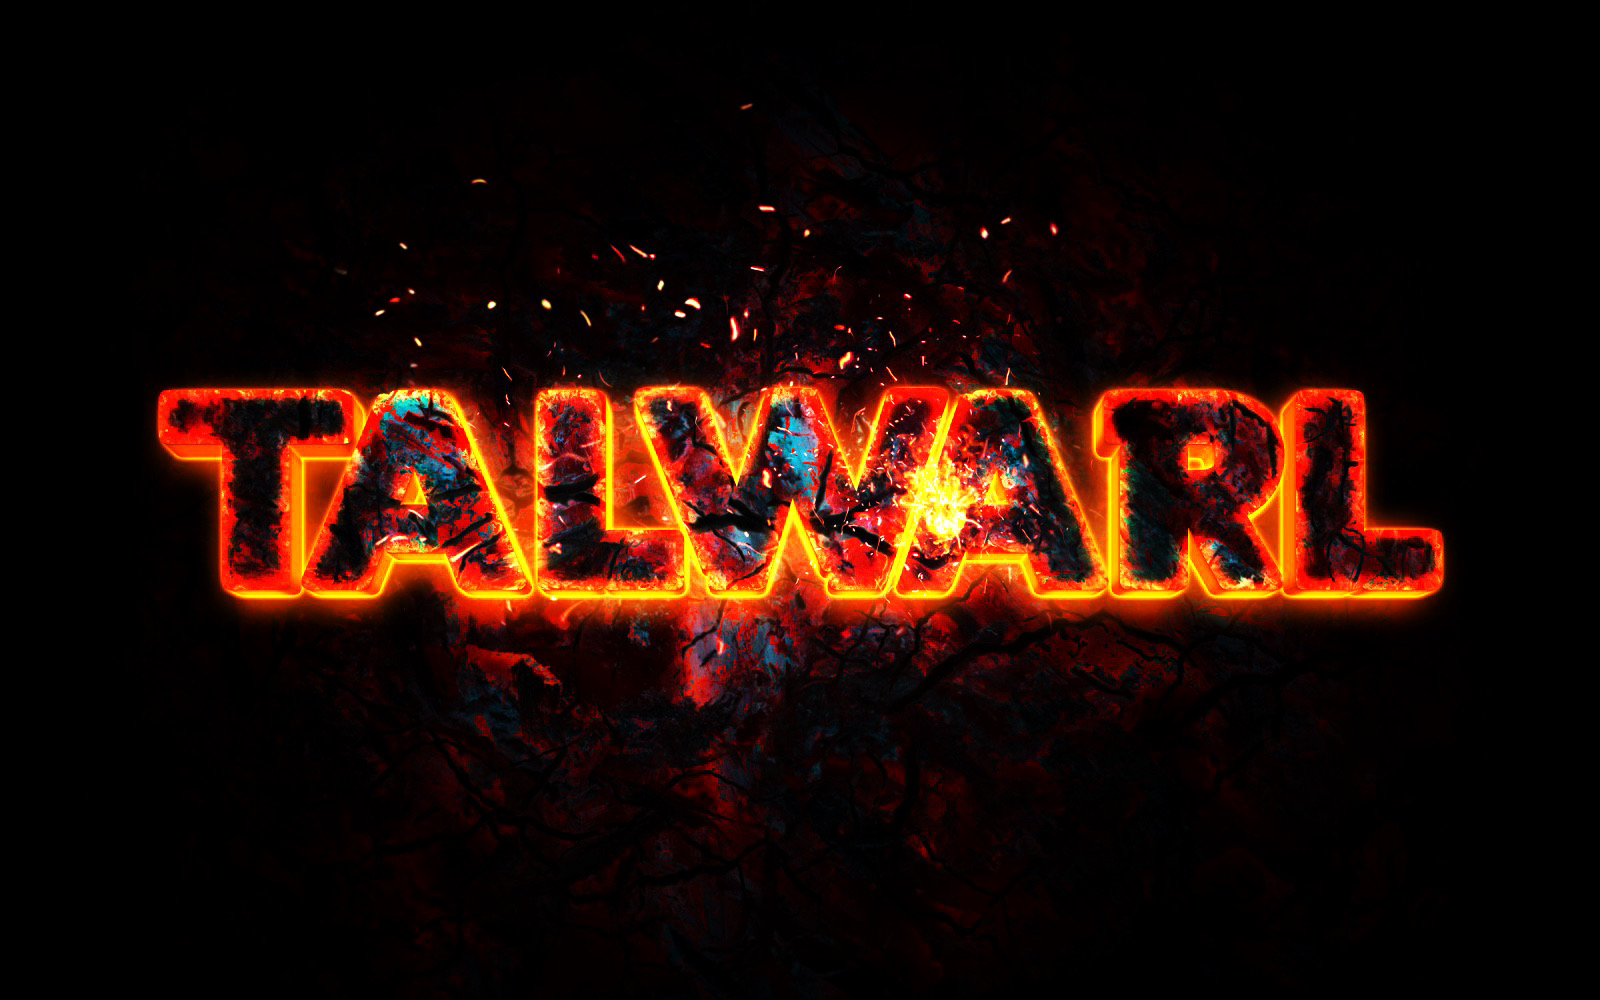 Tarwarl releases fiery new song 'Barricadoed Strong'